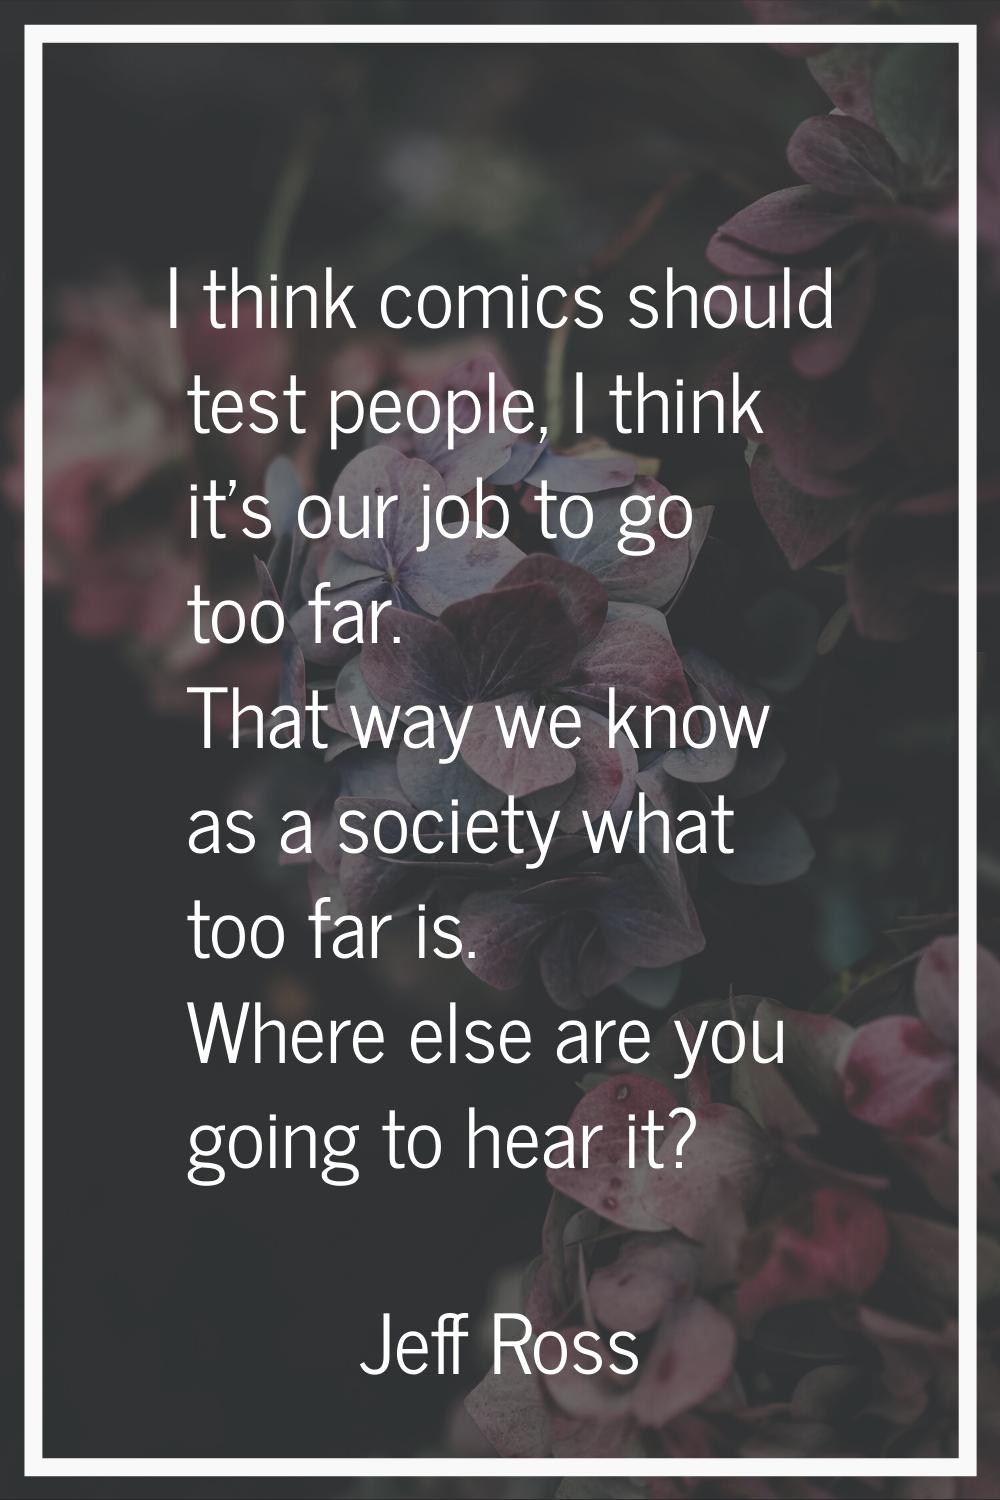 I think comics should test people, I think it's our job to go too far. That way we know as a societ